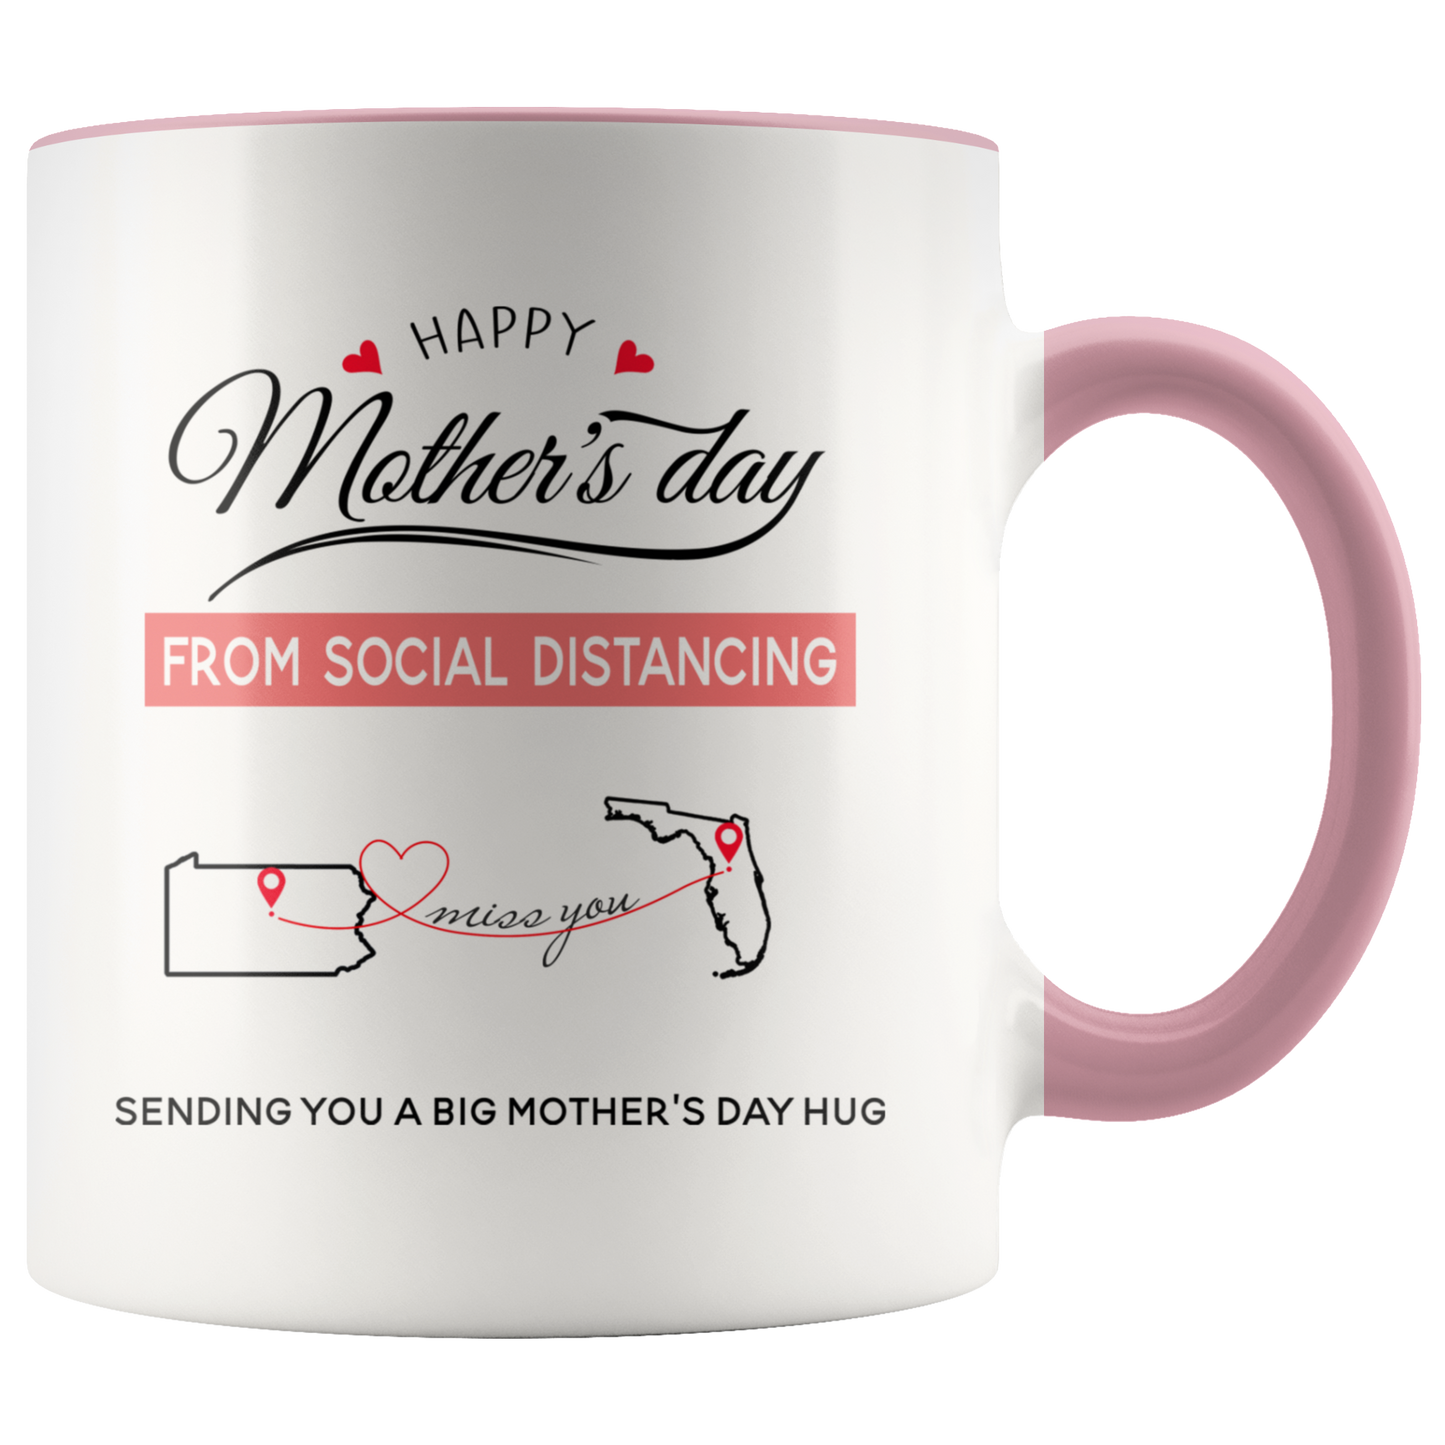 ND-21436354-sp-26126 - [ Pennsylvania | Florida ] (CC_Accent_Mug_) Happy Mothers Day From Social Distancing, Sending You A Big